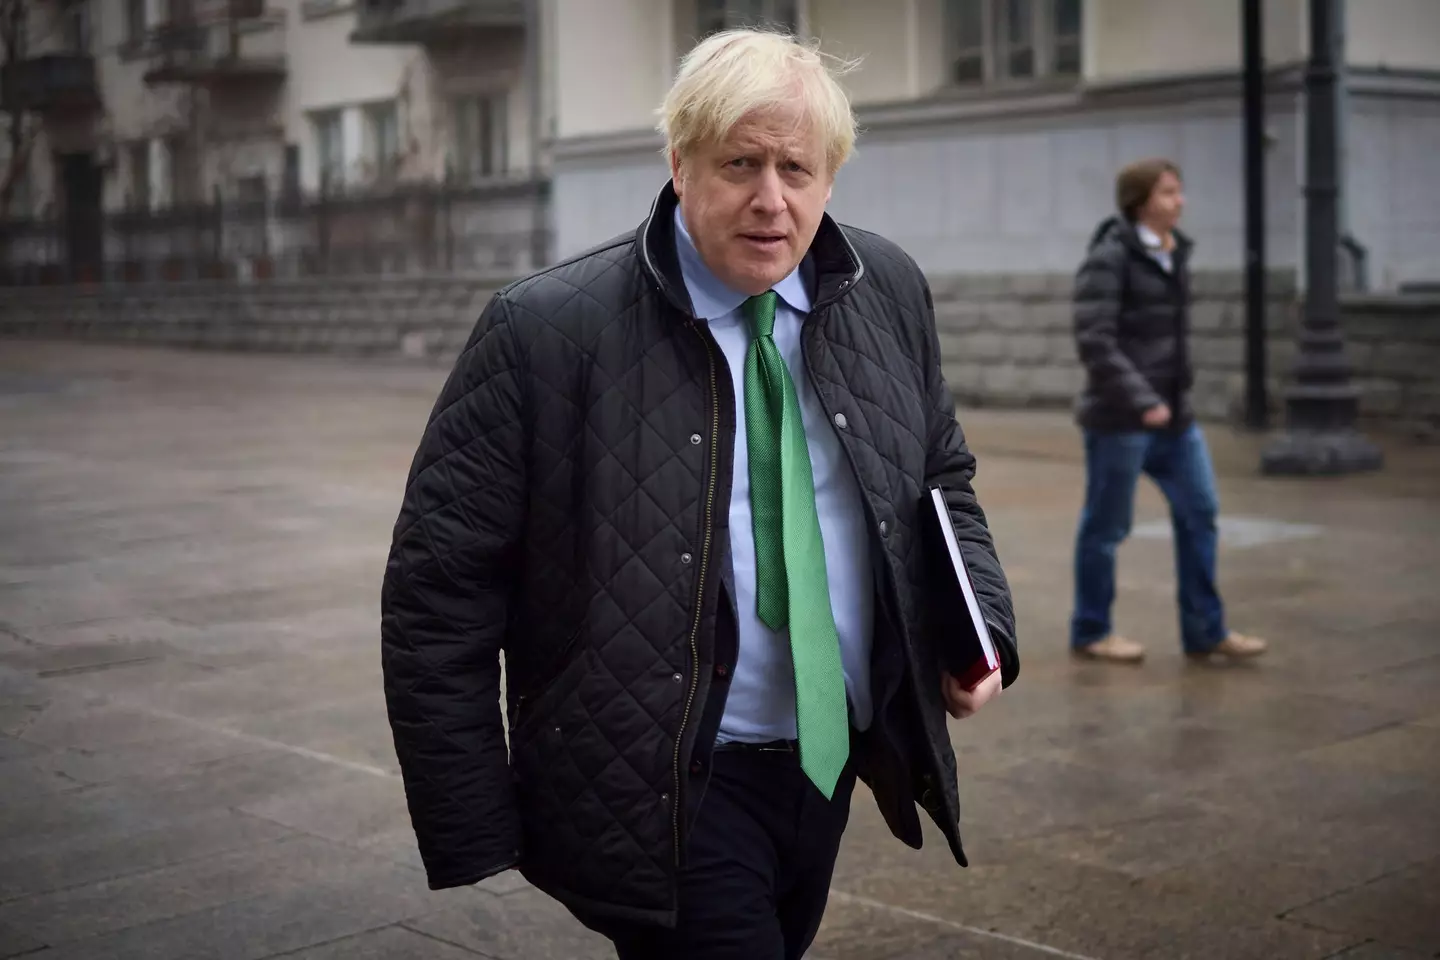 Boris Johnson has announced that he is quitting as an MP.